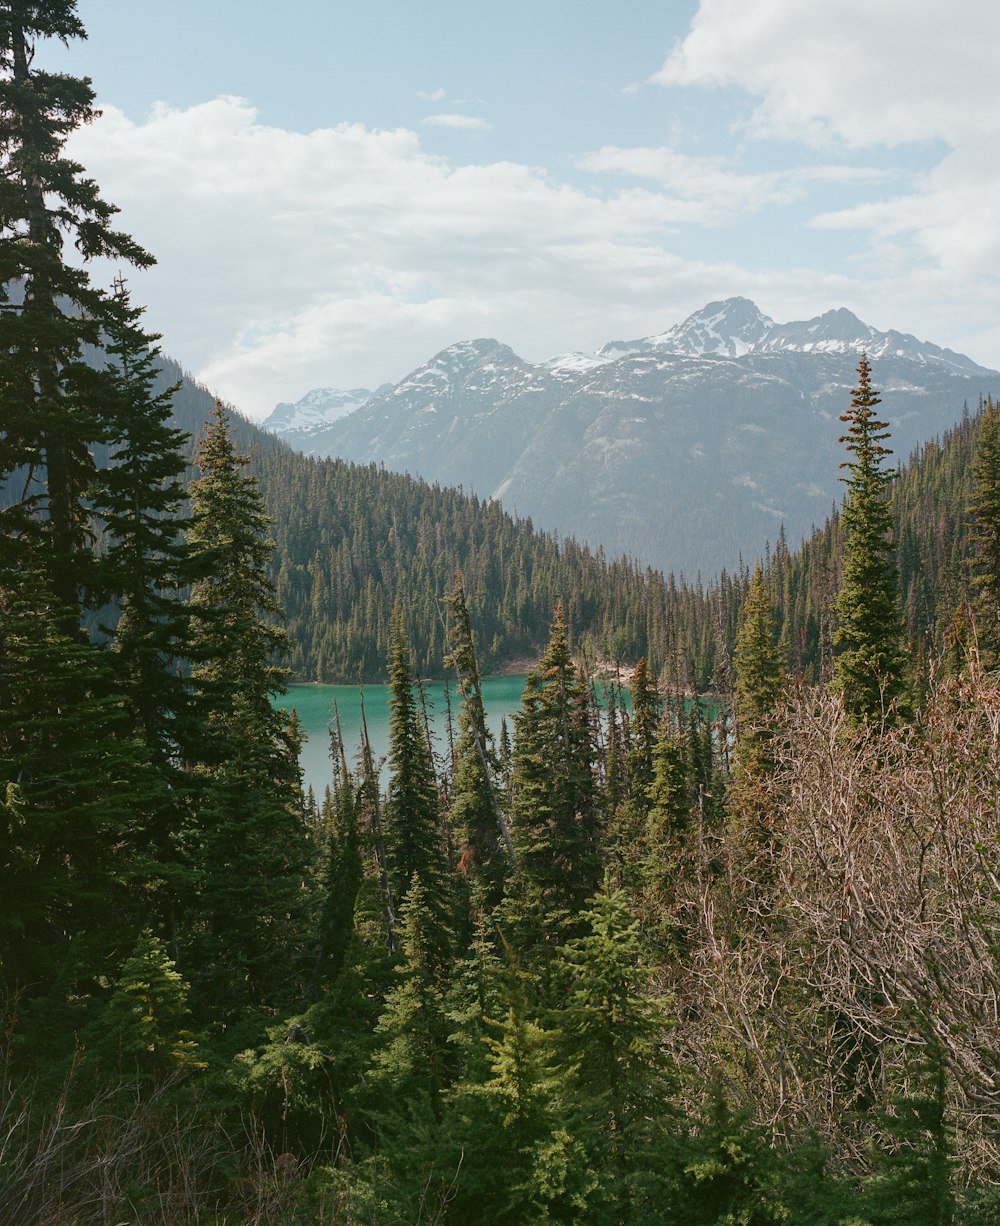 a scenic view of a mountain lake surrounded by pine trees